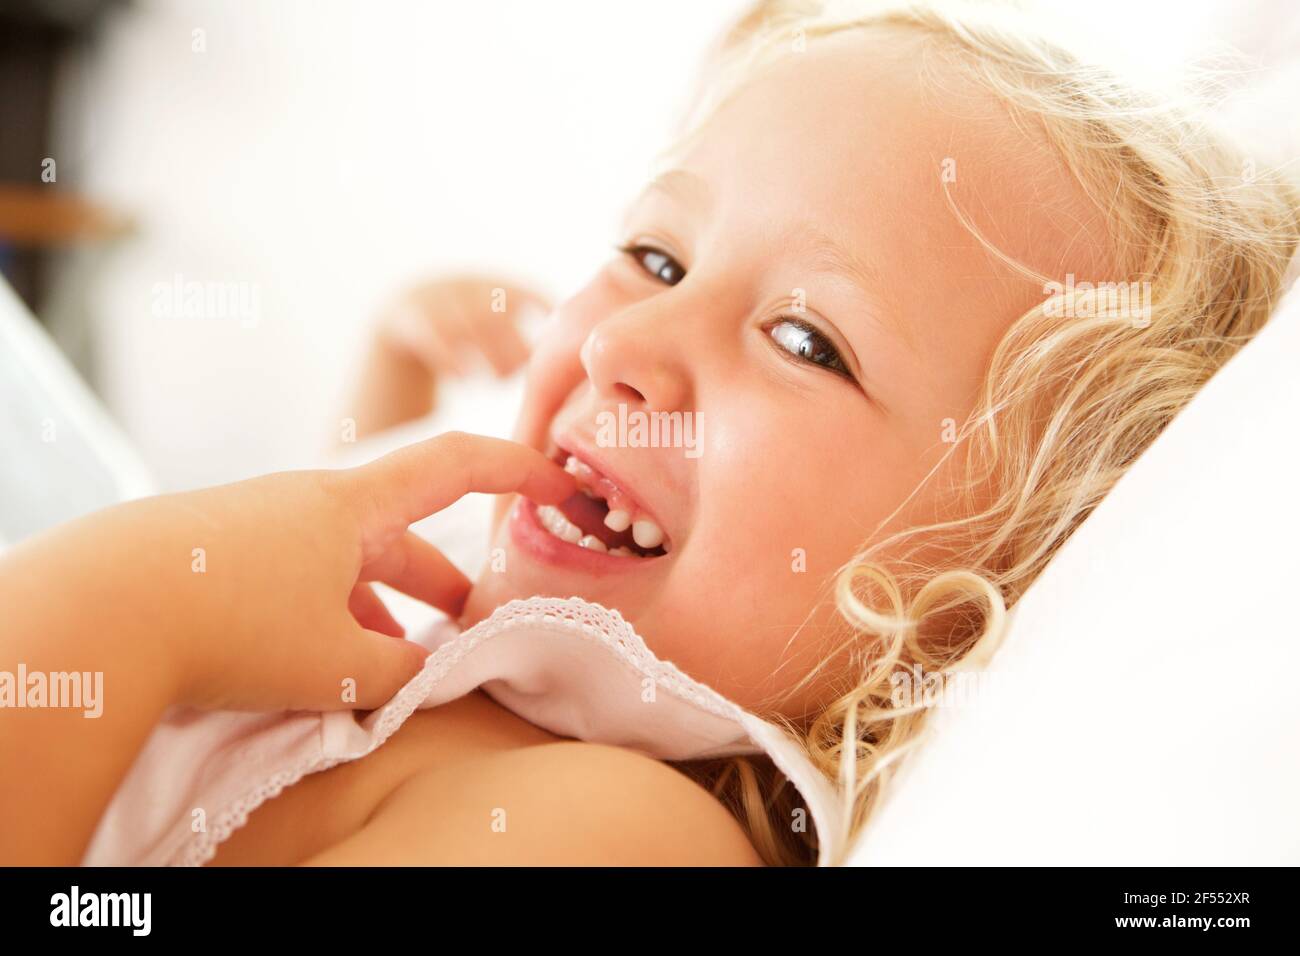 Close up portrait of beautiful little girl lying on bed and smiling Stock Photo